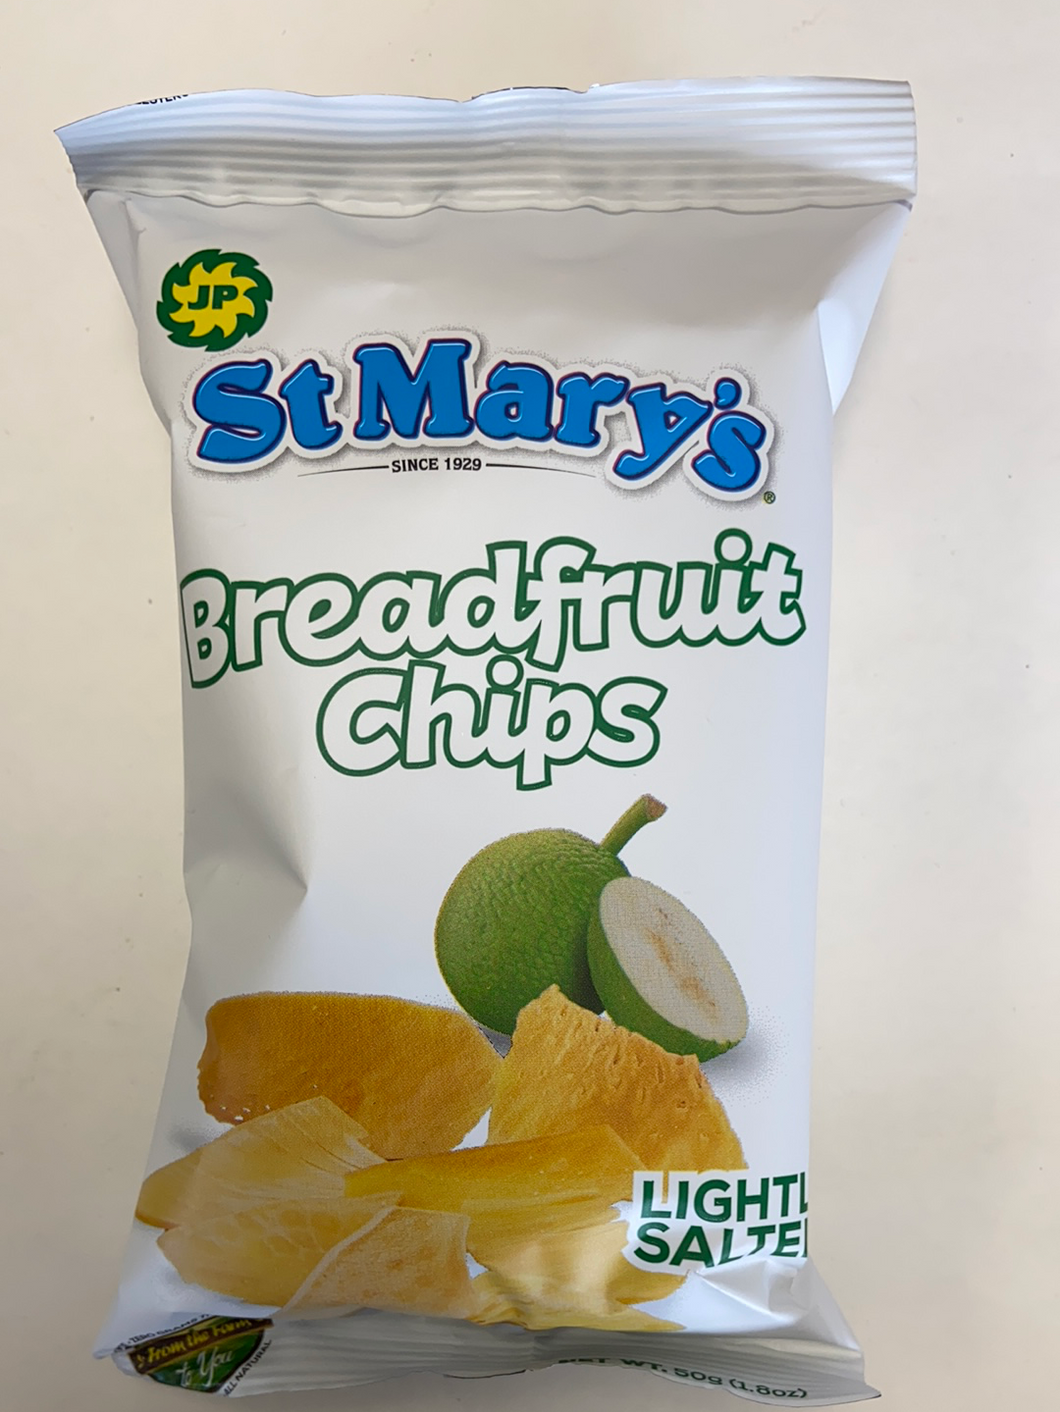 Breadfruit Chips, St. Mary’s